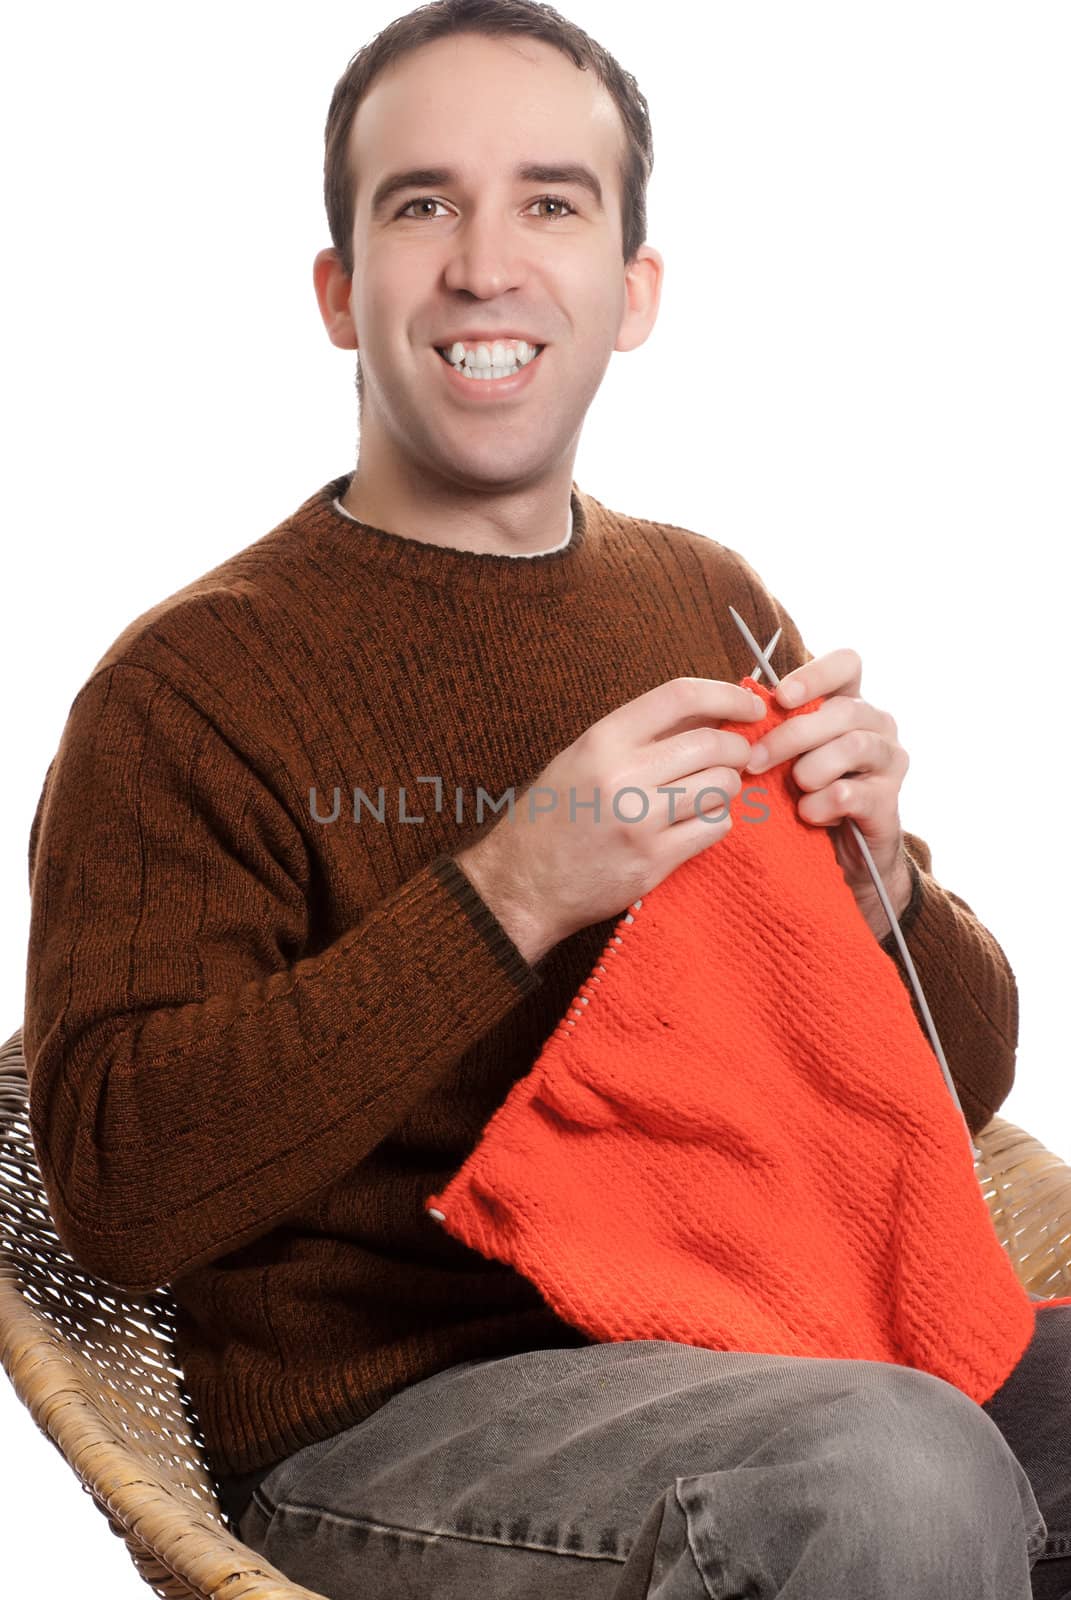 A happy man is knitting something while sitting down, isolated against a white background